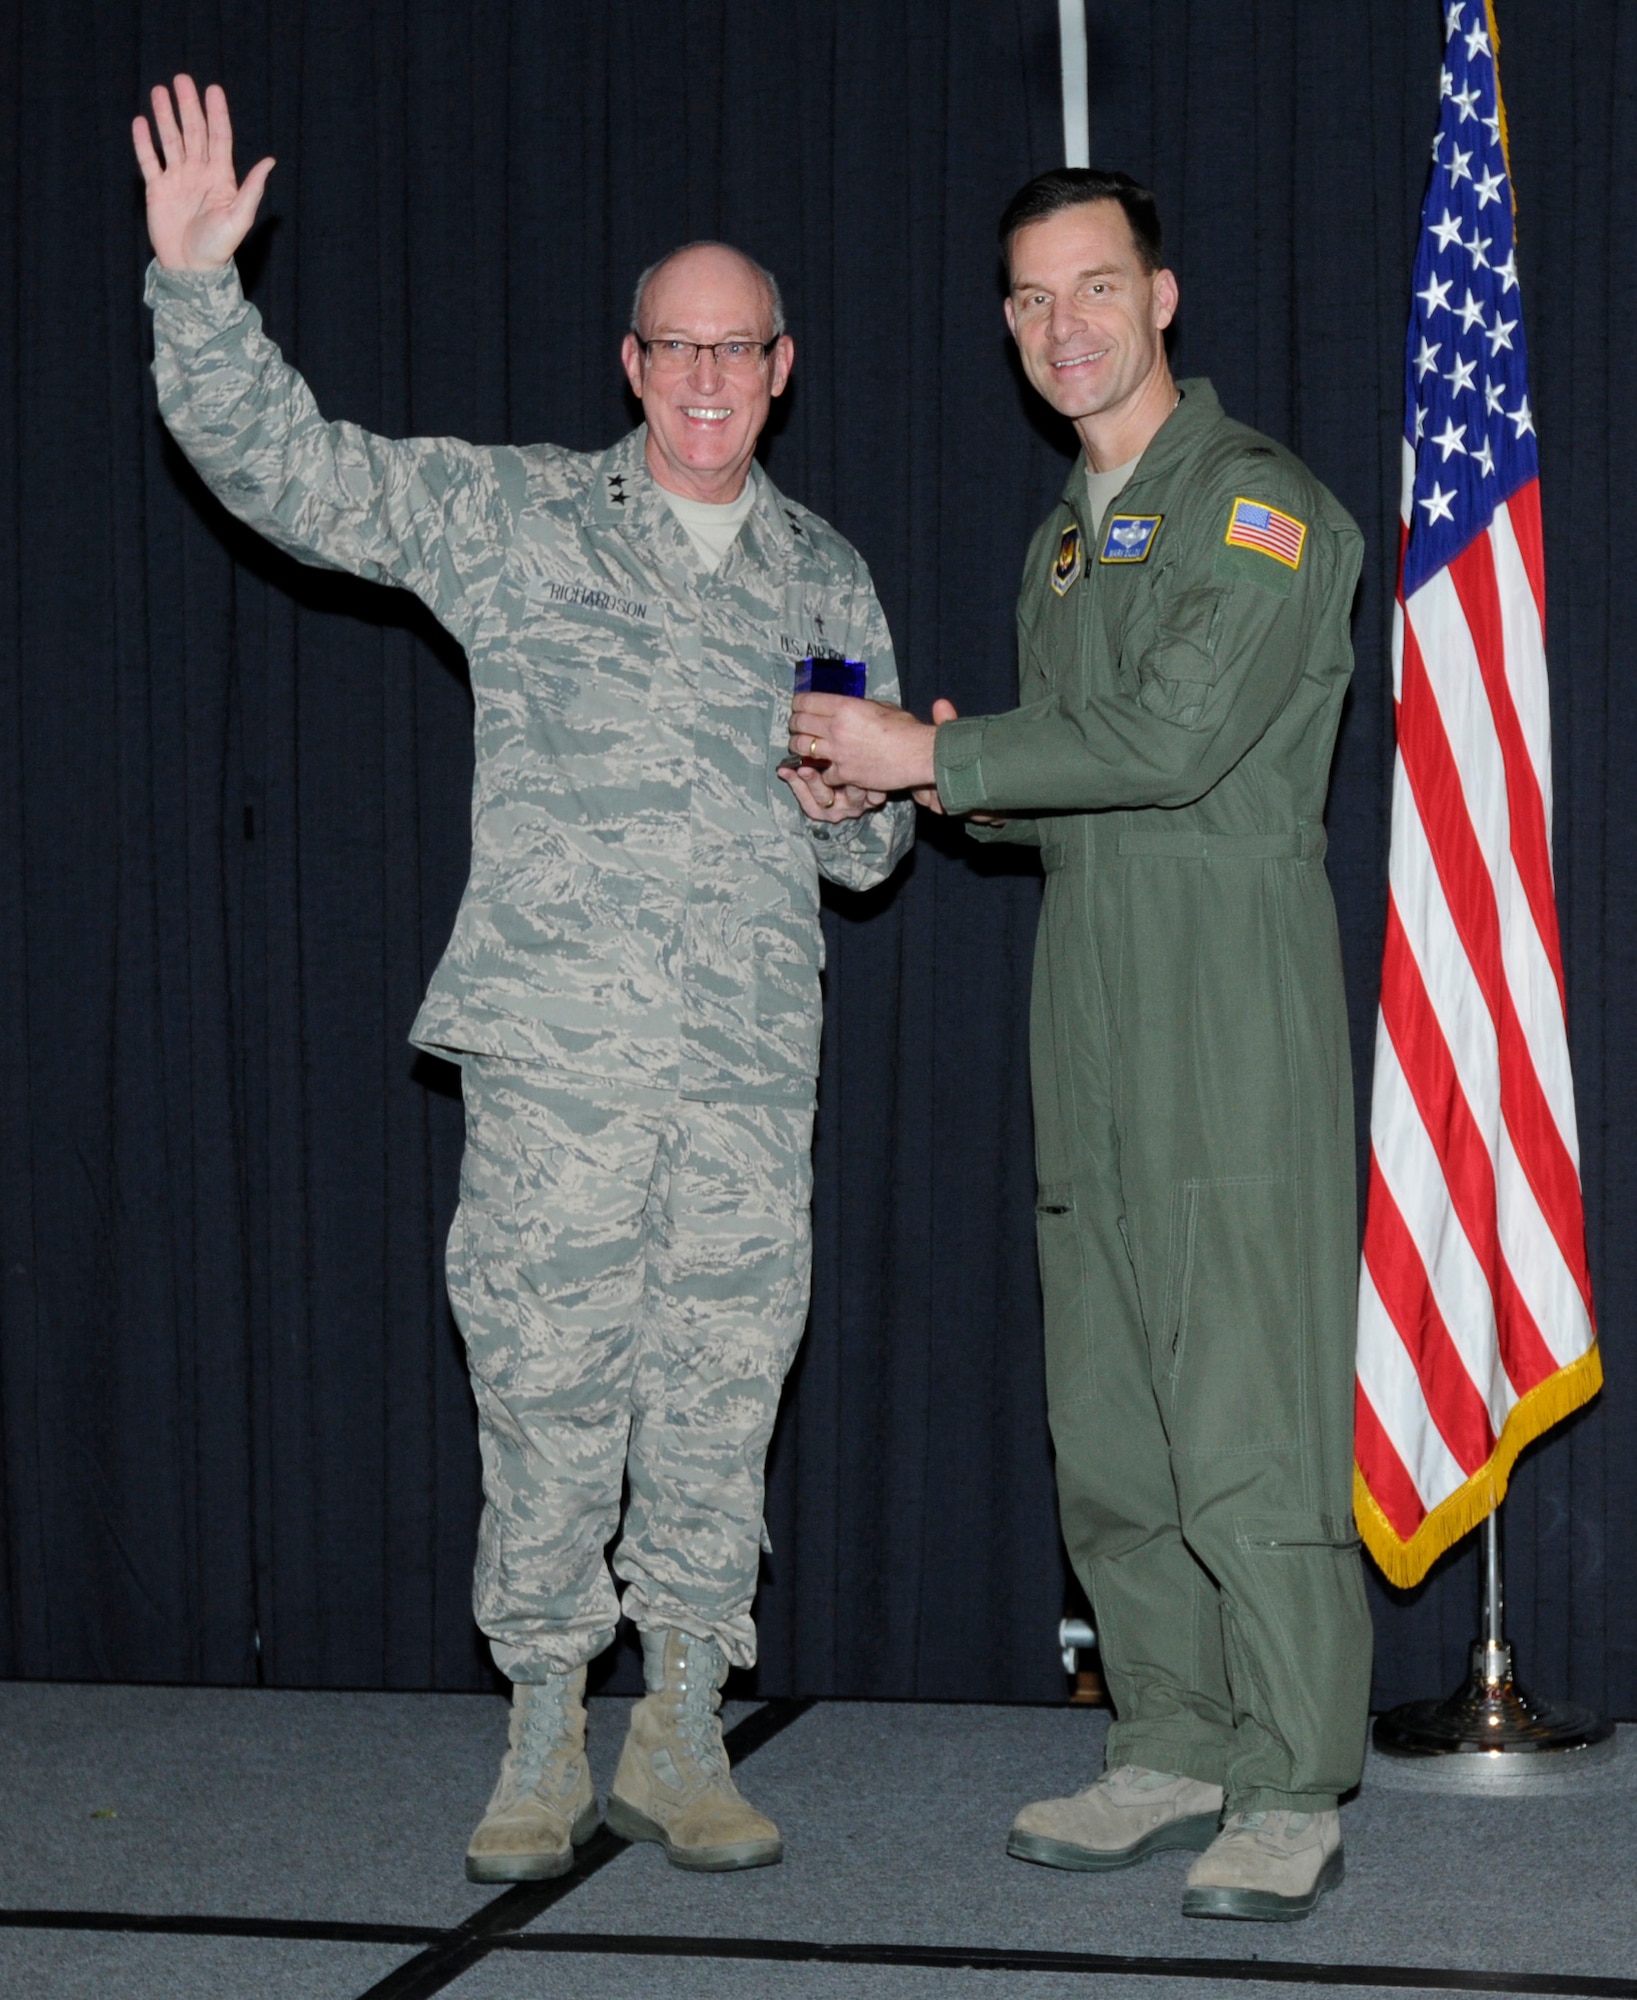 U.S. Air Force Brig. Gen. Mark Dillon, 86th Airlift Wing commander, presents Maj. Gen. Cecil Richardson, U.S. Air Force chief of chaplains, a memento of appreciation for his dedication to the Chaplain's Corps' during a National Prayer Luncheon, Ramstein Air Base, Germany, Feb. 9, 2011. Originally called "Prayer Breakfast", the tradition was established in 1953 by members of the U.S. Senate, U.S. House Prayer Groups and President Dwight D. Eisenhower. (U.S. Air Force photo by Airman Kendra Alba)